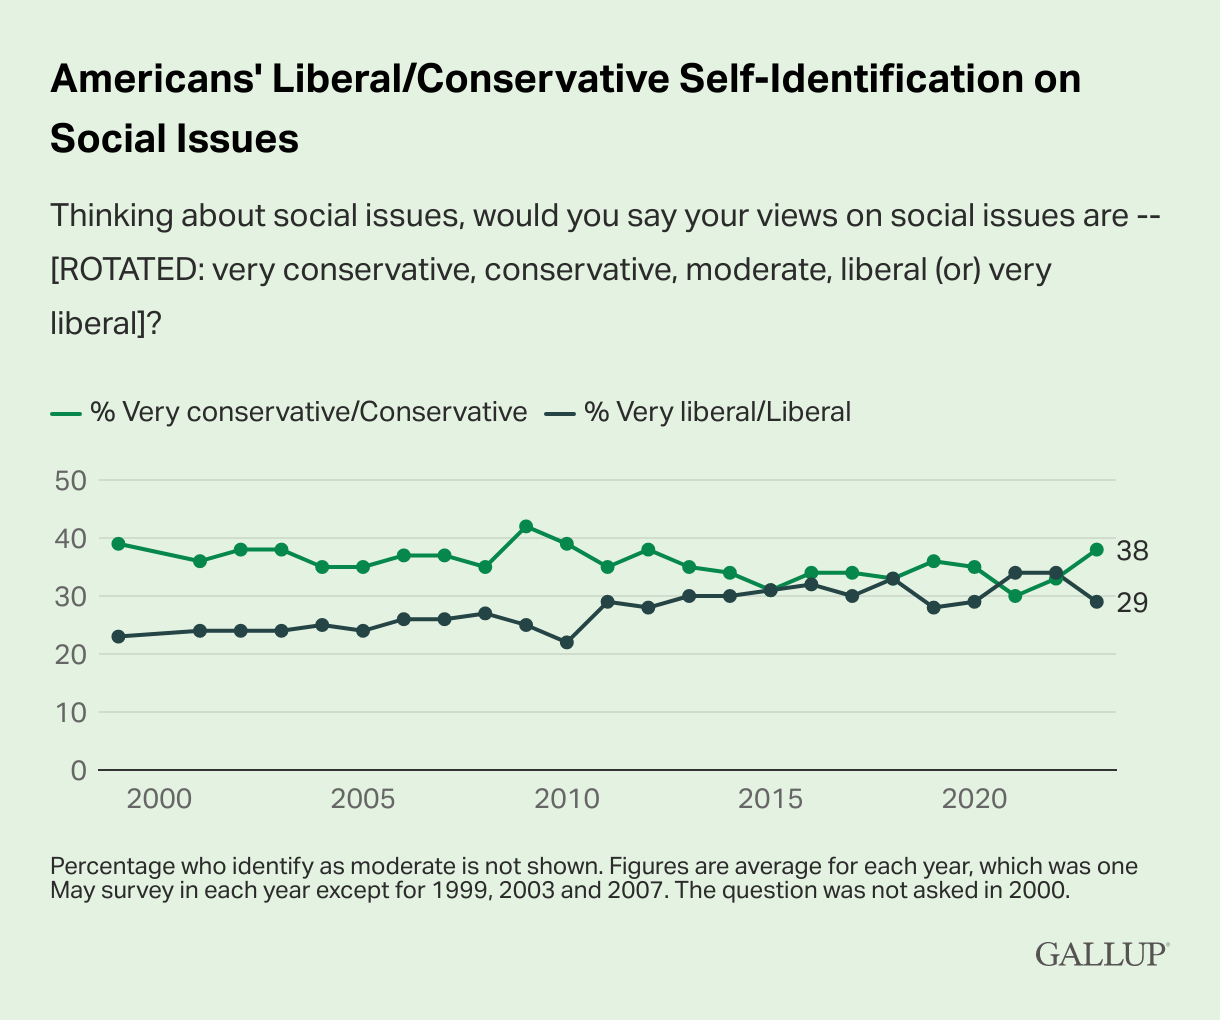 Republicans Are Becoming More Conservative Which Is Making America Skew More Conservative